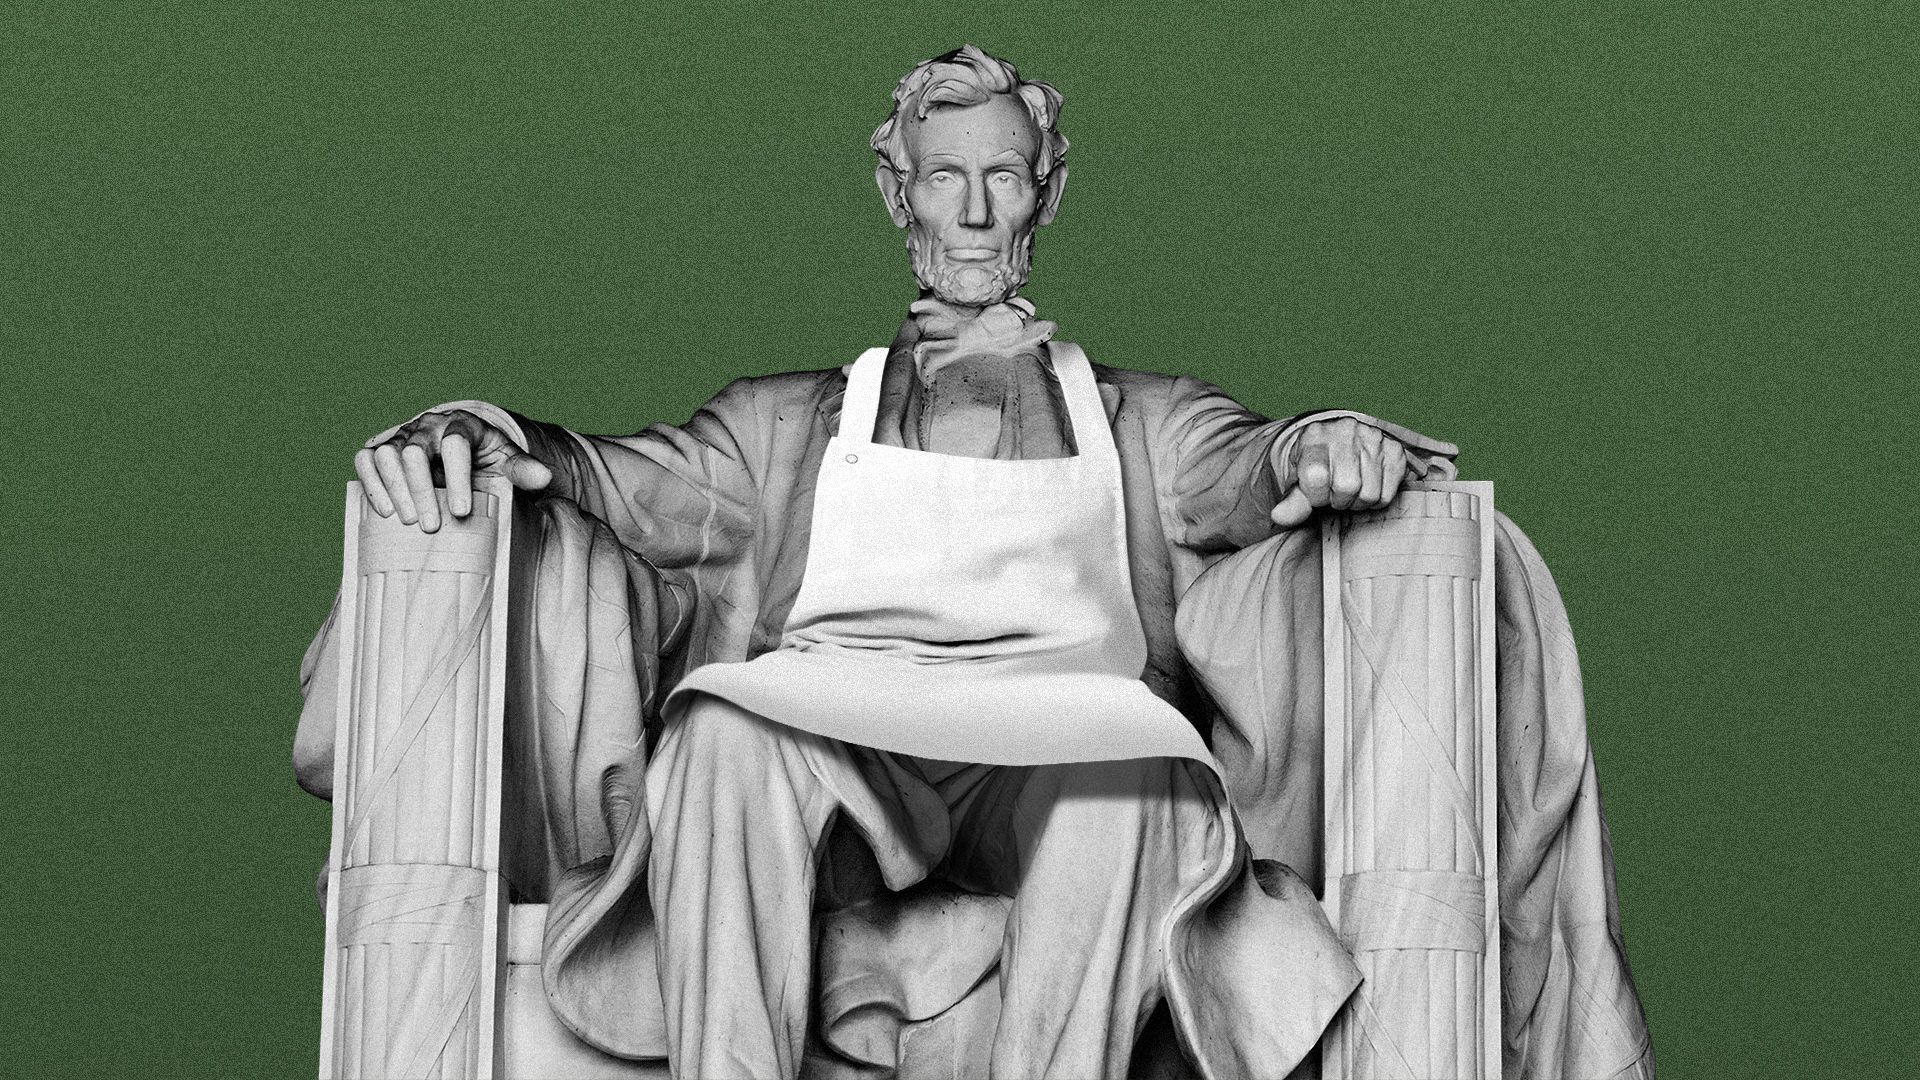 Illustration of an apron on the Lincoln Memorial.